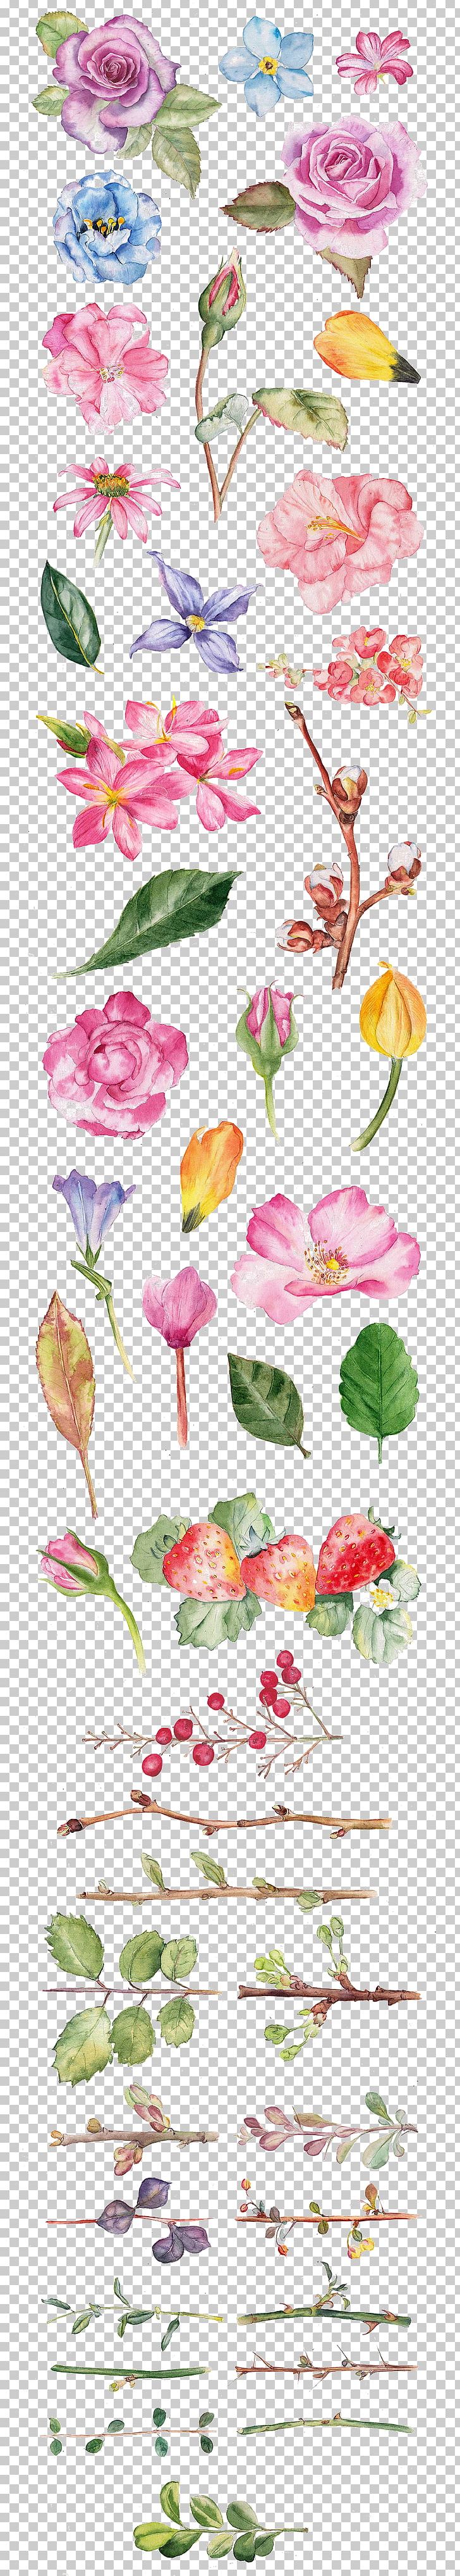 Watercolor Painting Flower Drawing Illustration PNG, Clipart, Cut, Design, Flower Arranging, Flower Drawings, Flowers Free PNG Download